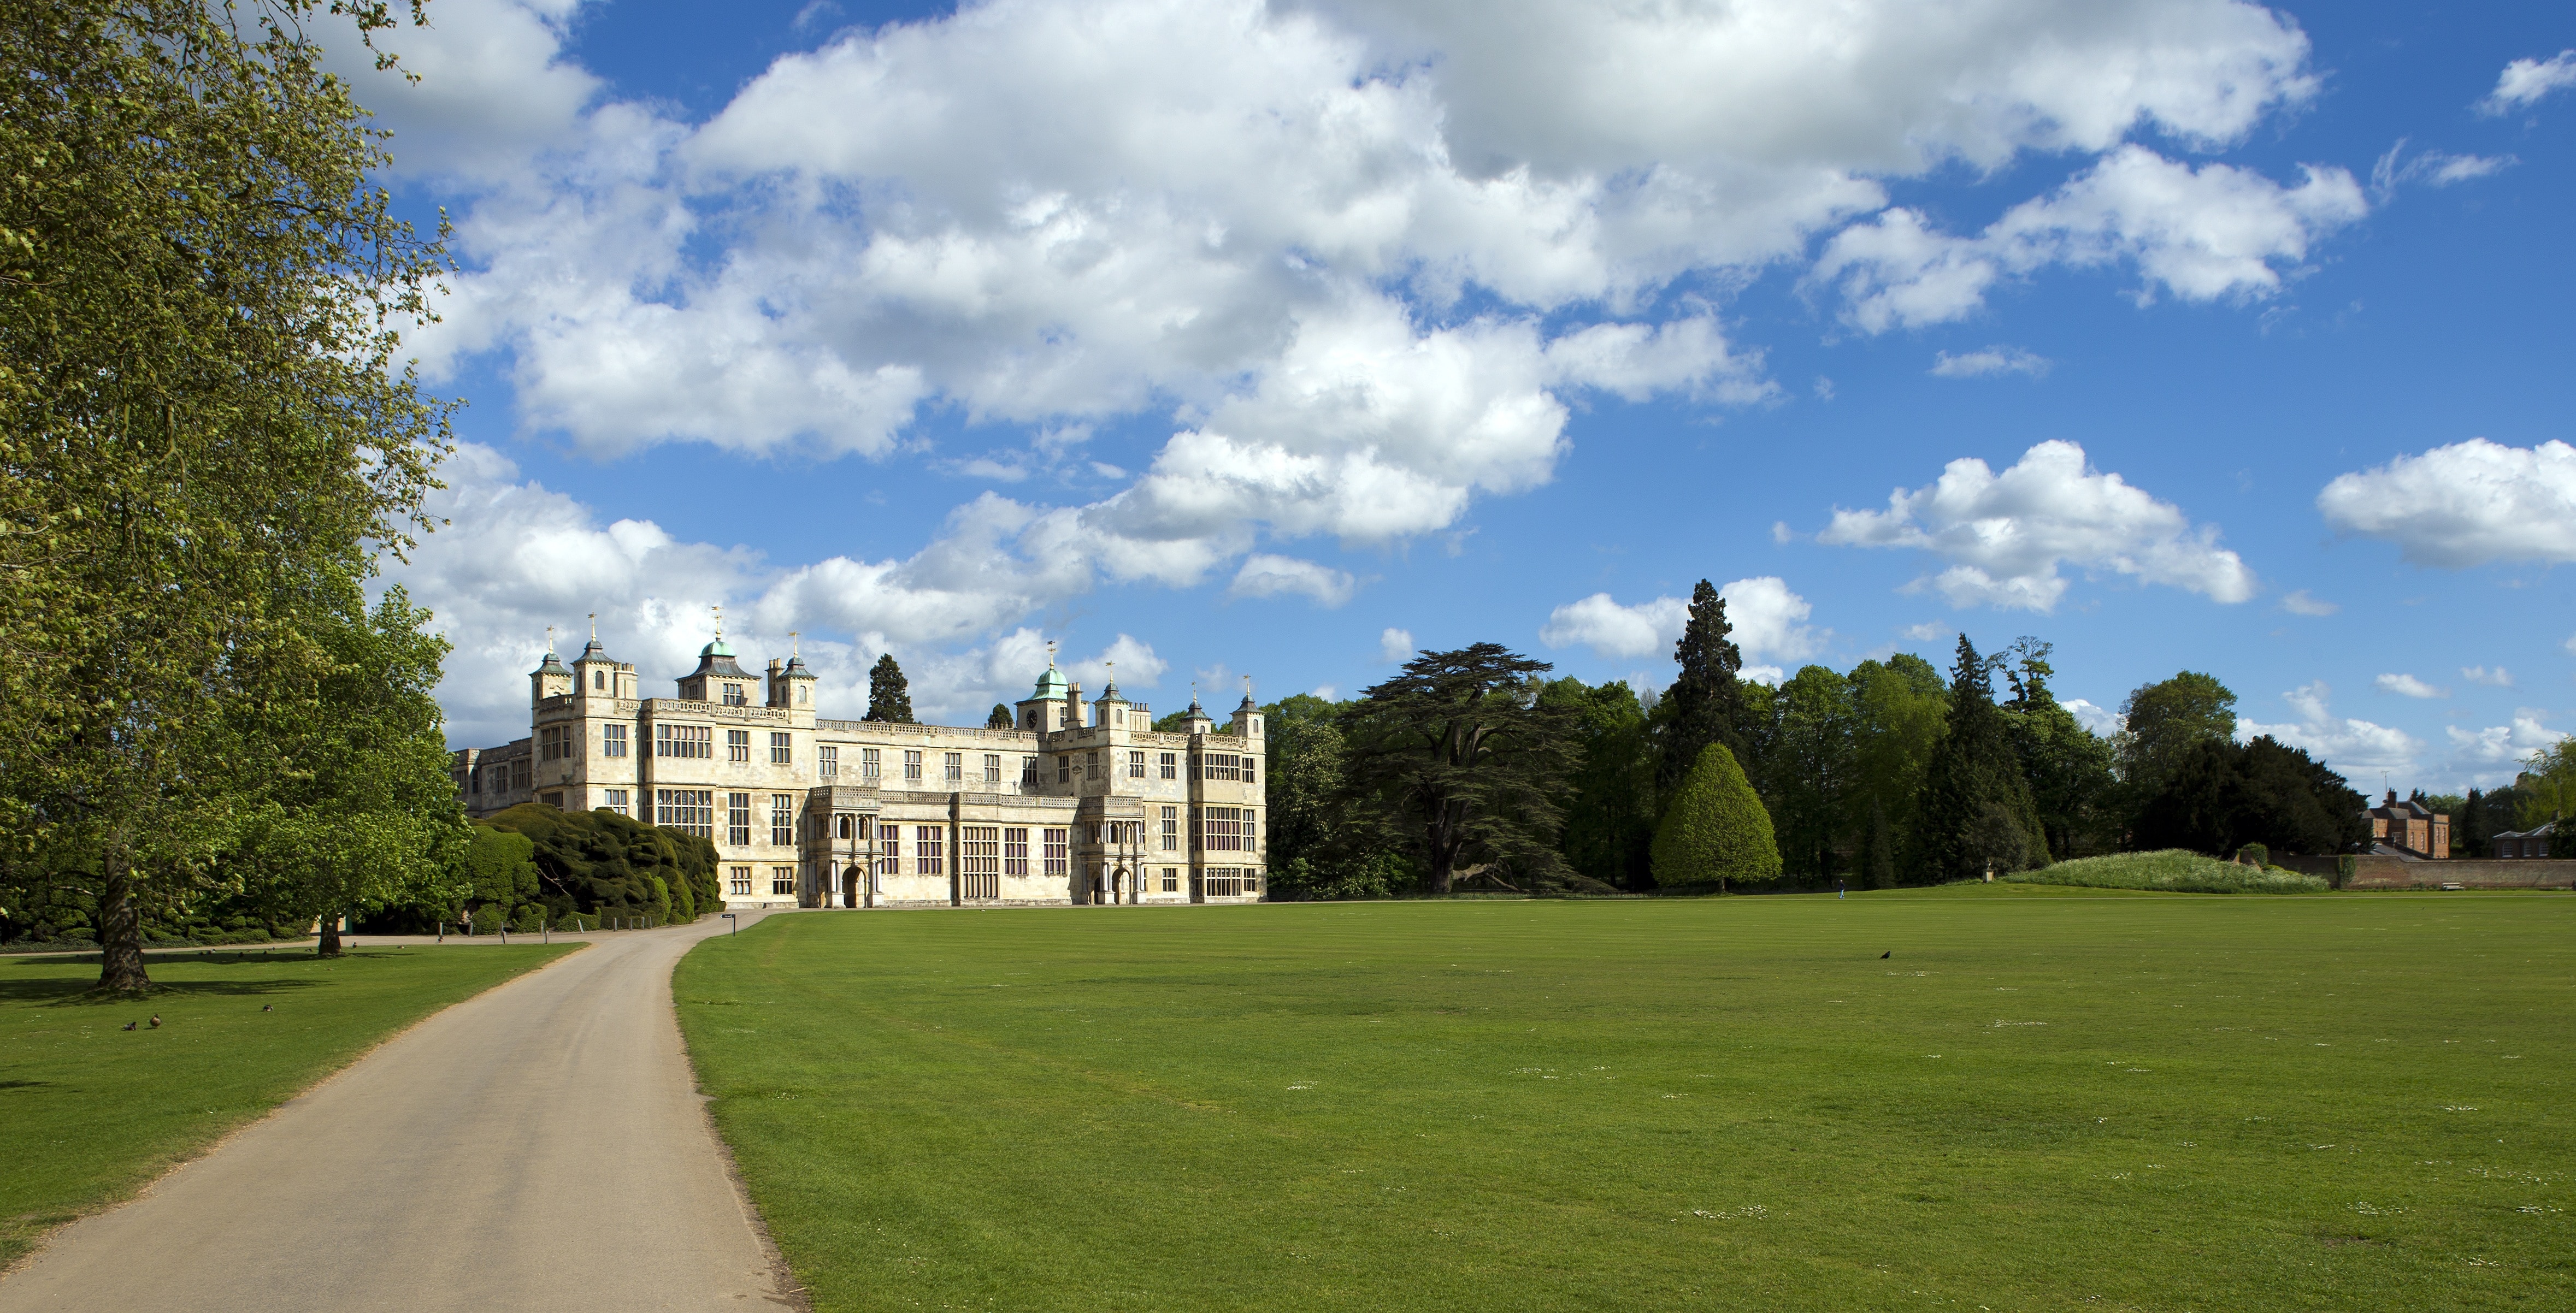 Audley End, Uk, Essex, architecture, history